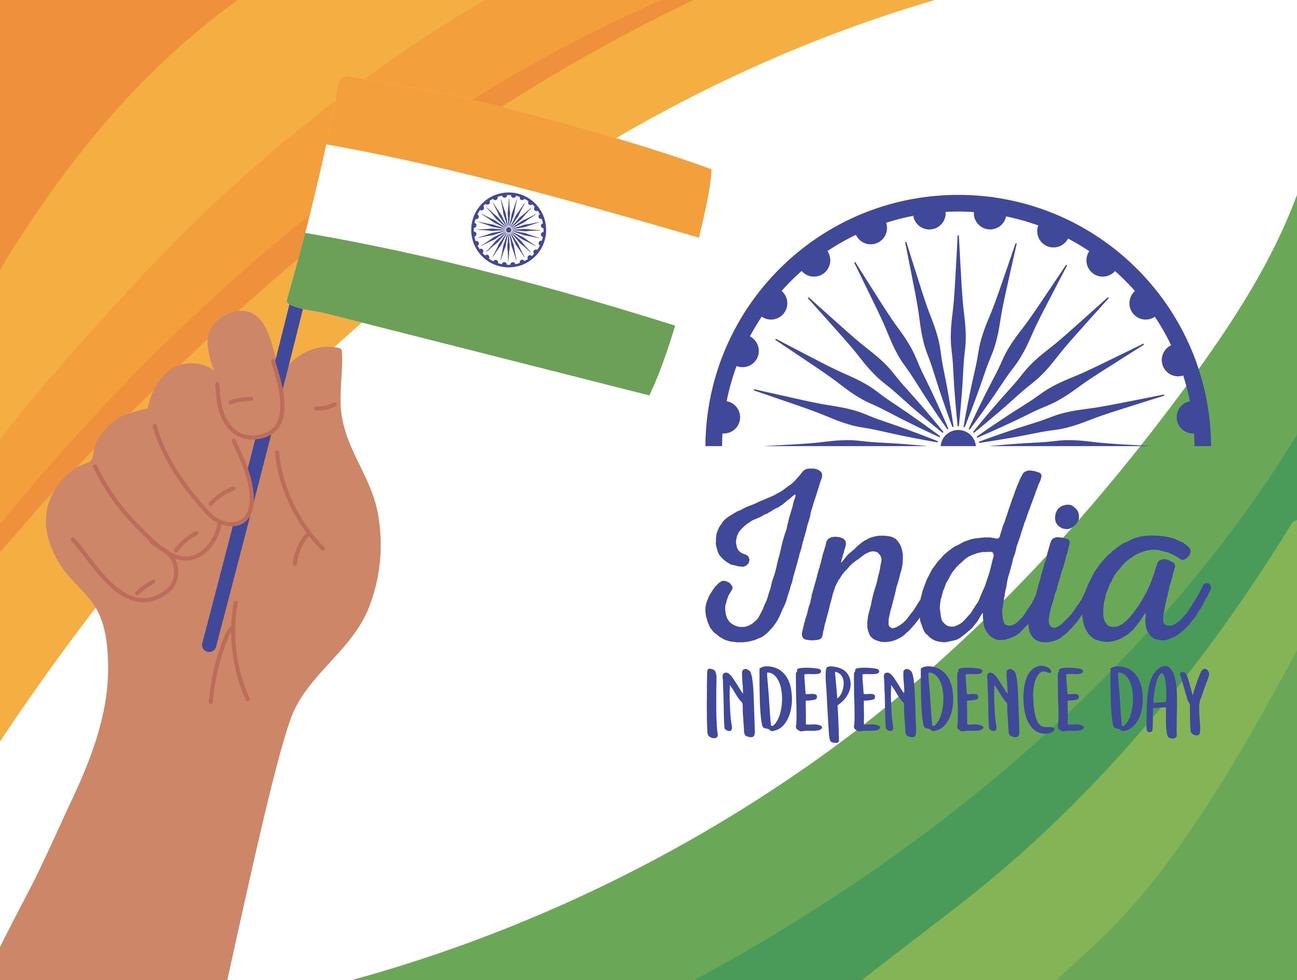 happy India independence day with Ashoka wheel and flag vector